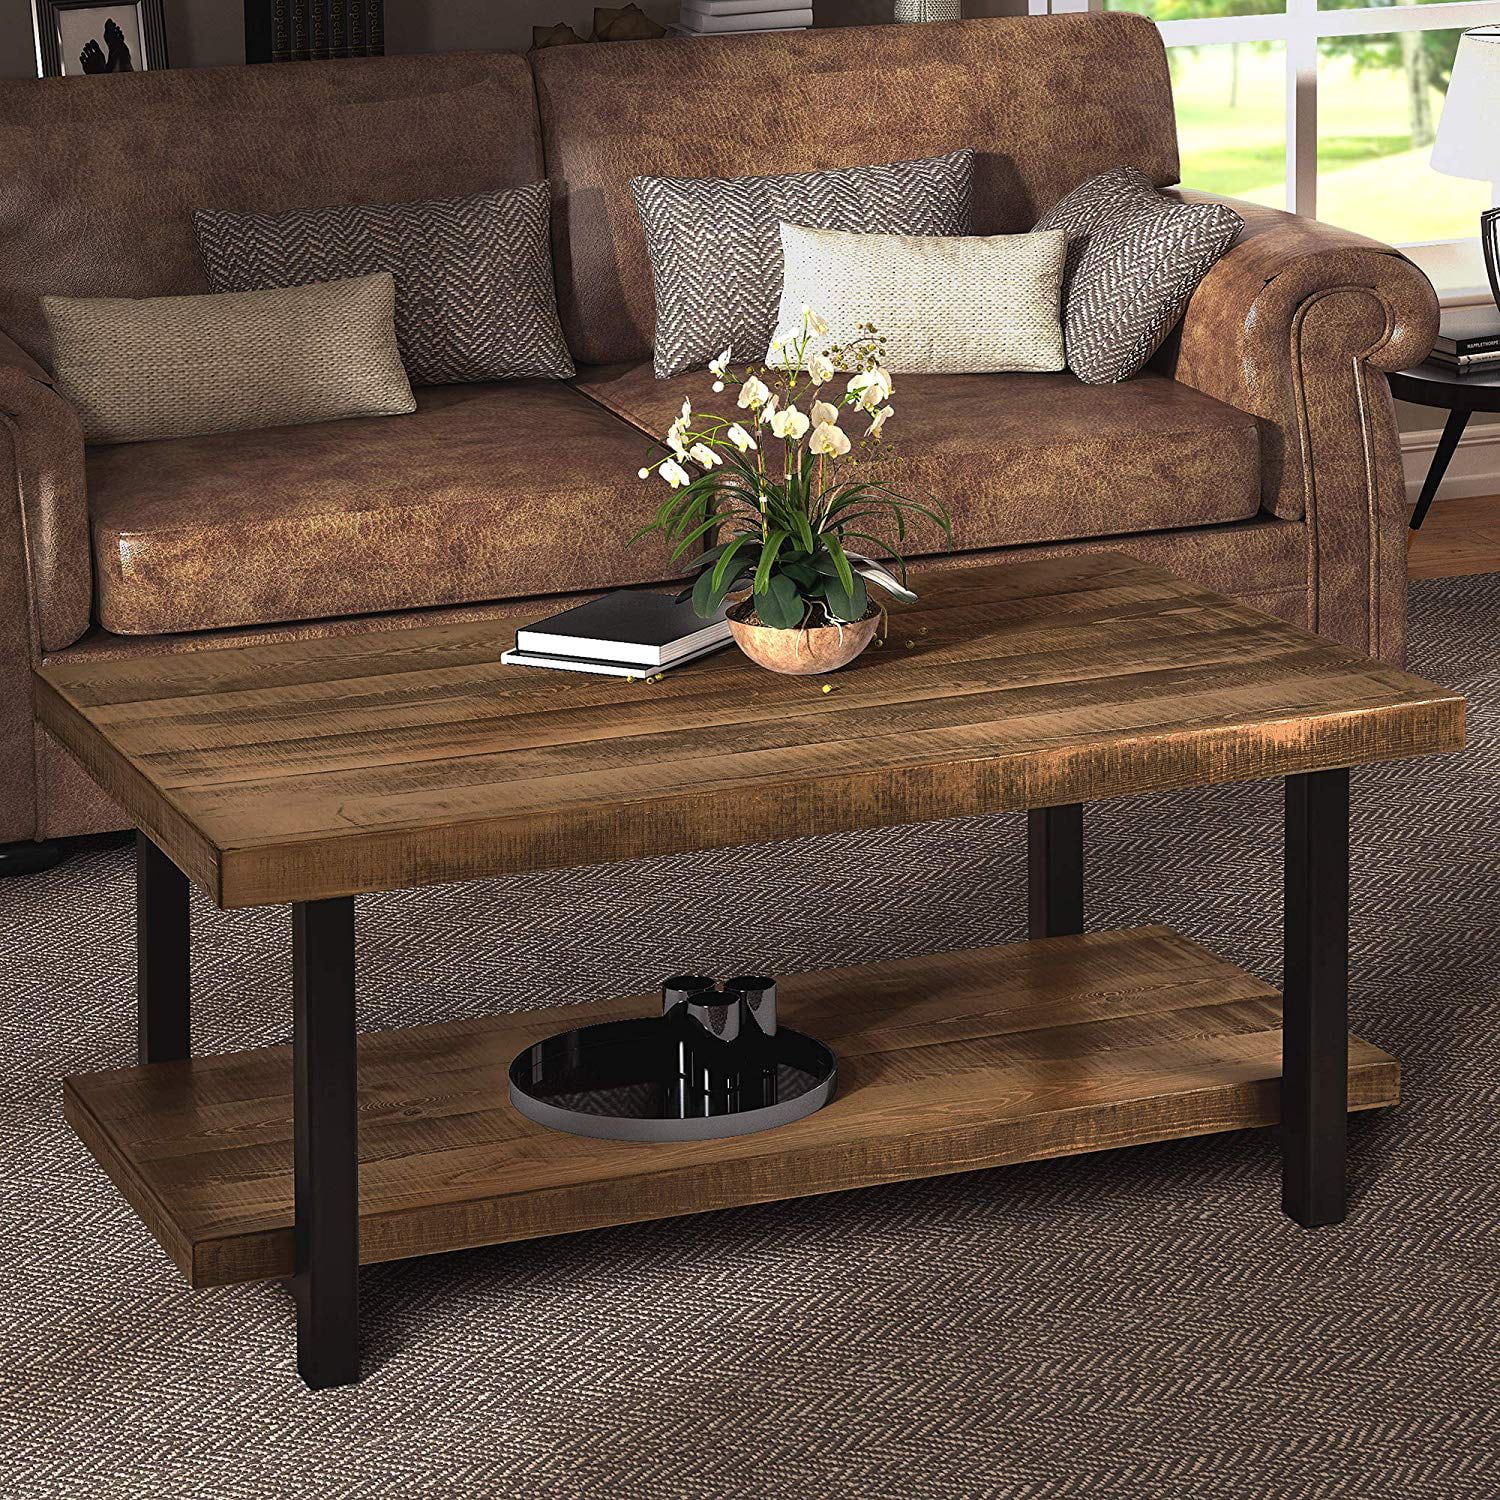 Harper&bright Designs Industrial Rectangular Pine Wood Coffee Table In Rustic Wood Coffee Tables (View 8 of 15)